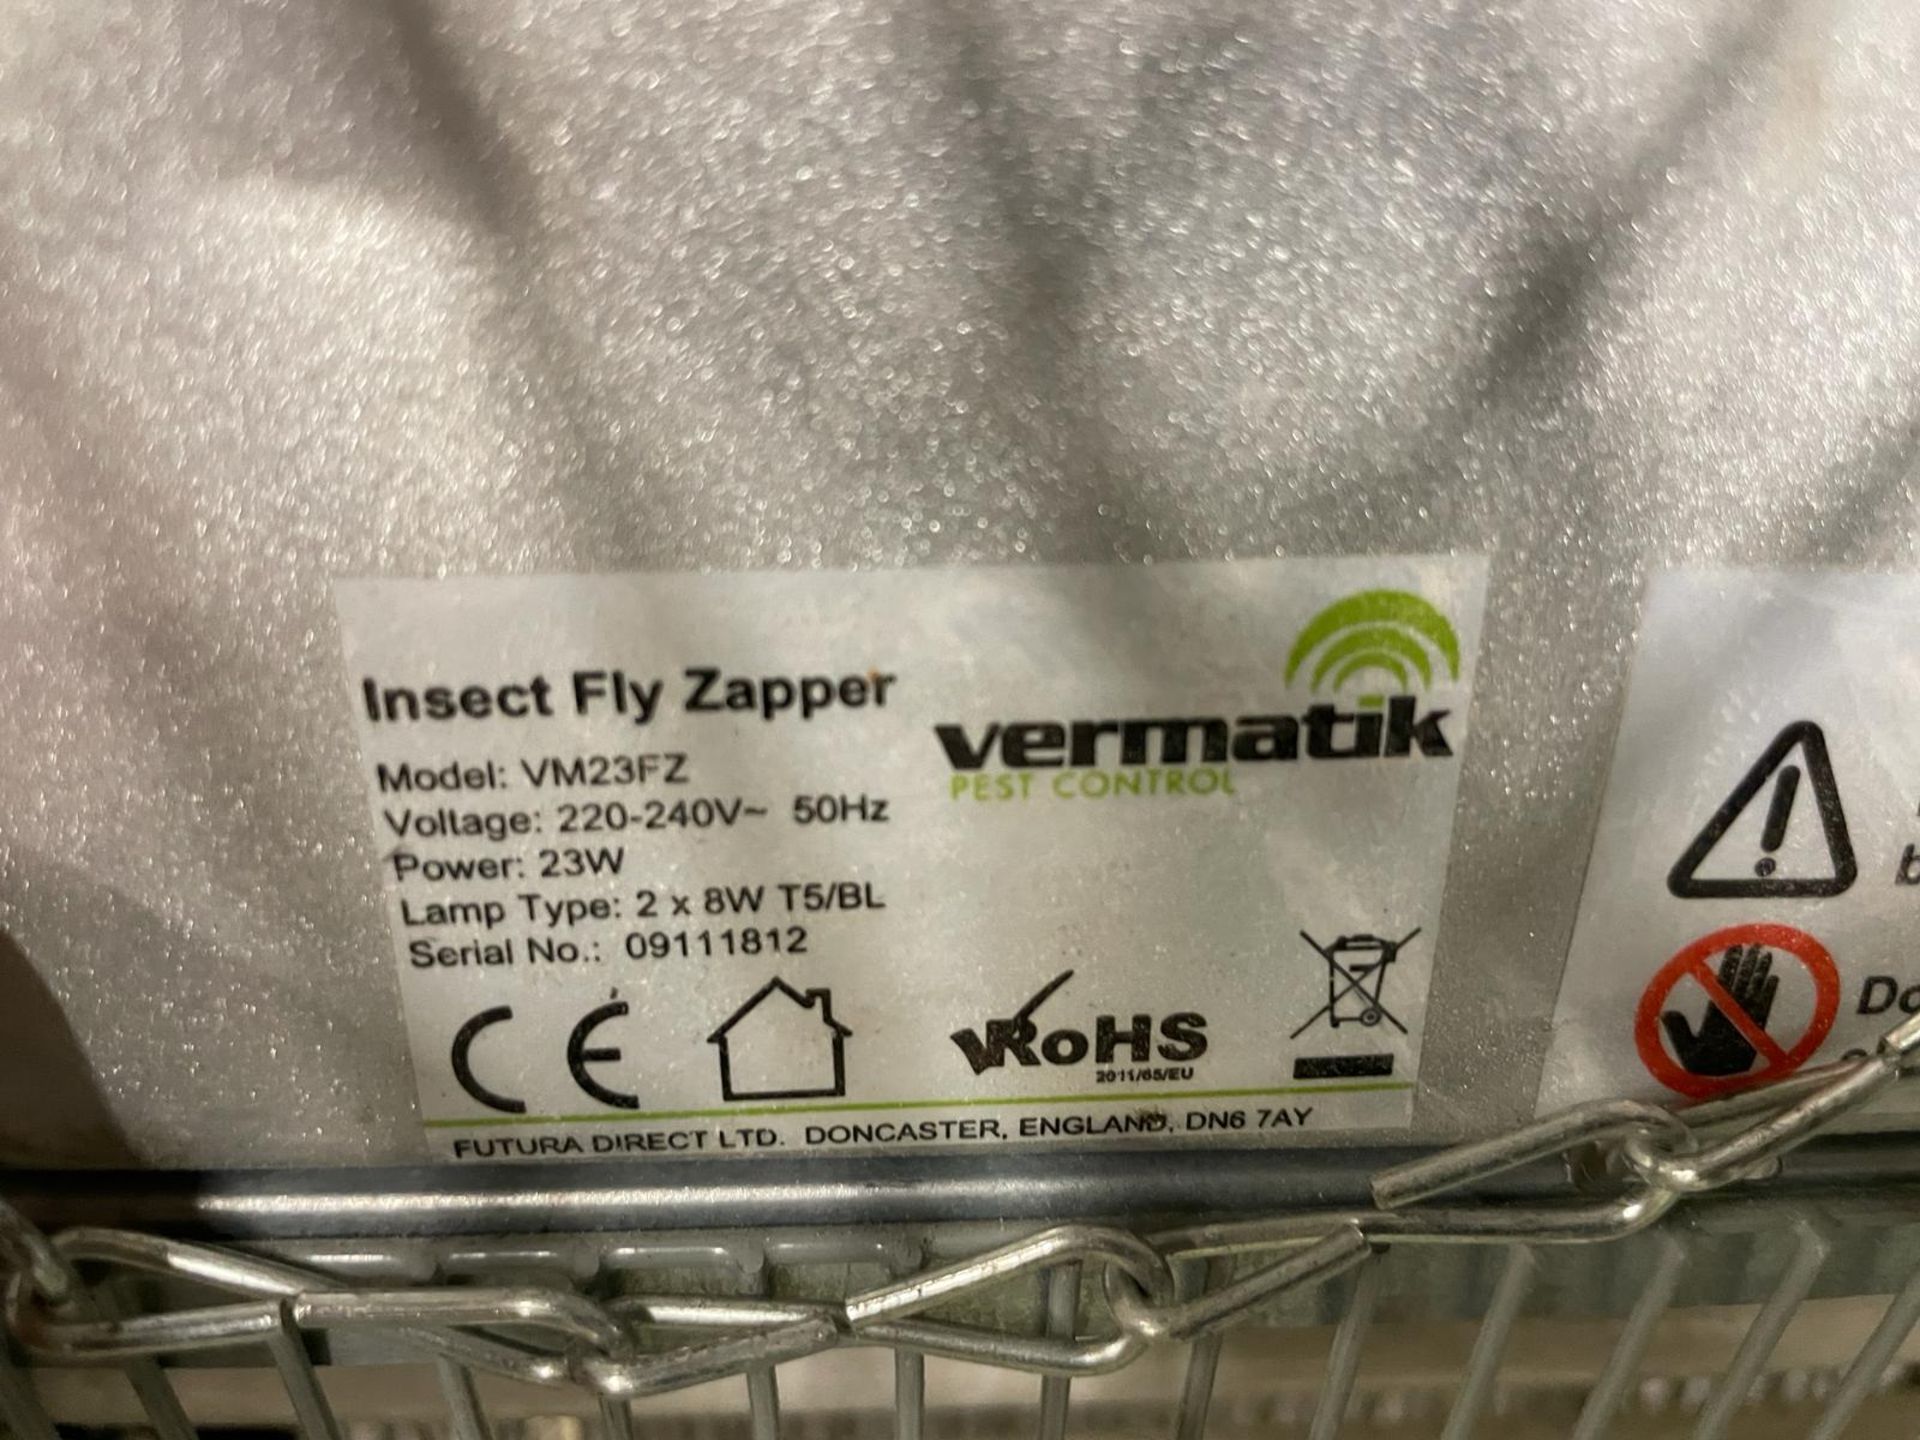 1 x Vermatik Insect Fly Zapper - Image 4 of 7